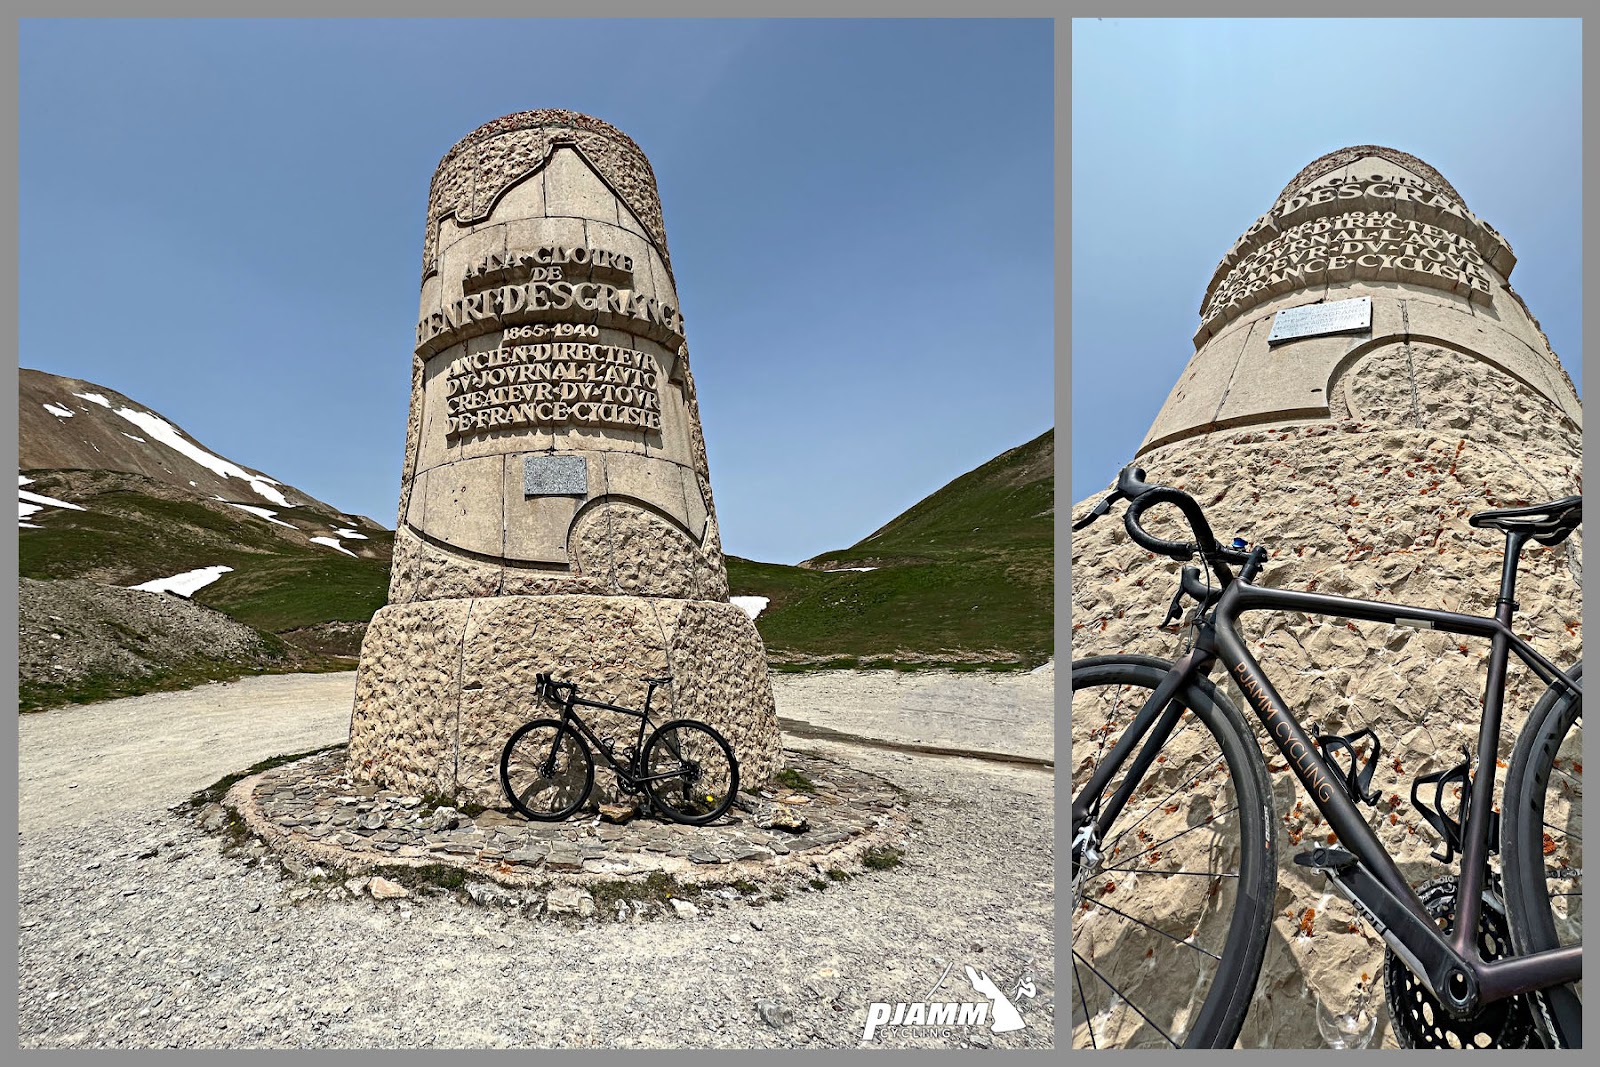 Cycling Col du Galibier from Valloire: bike parked against base of large stone memorial for Henri Desgrange, first director of Tour de France